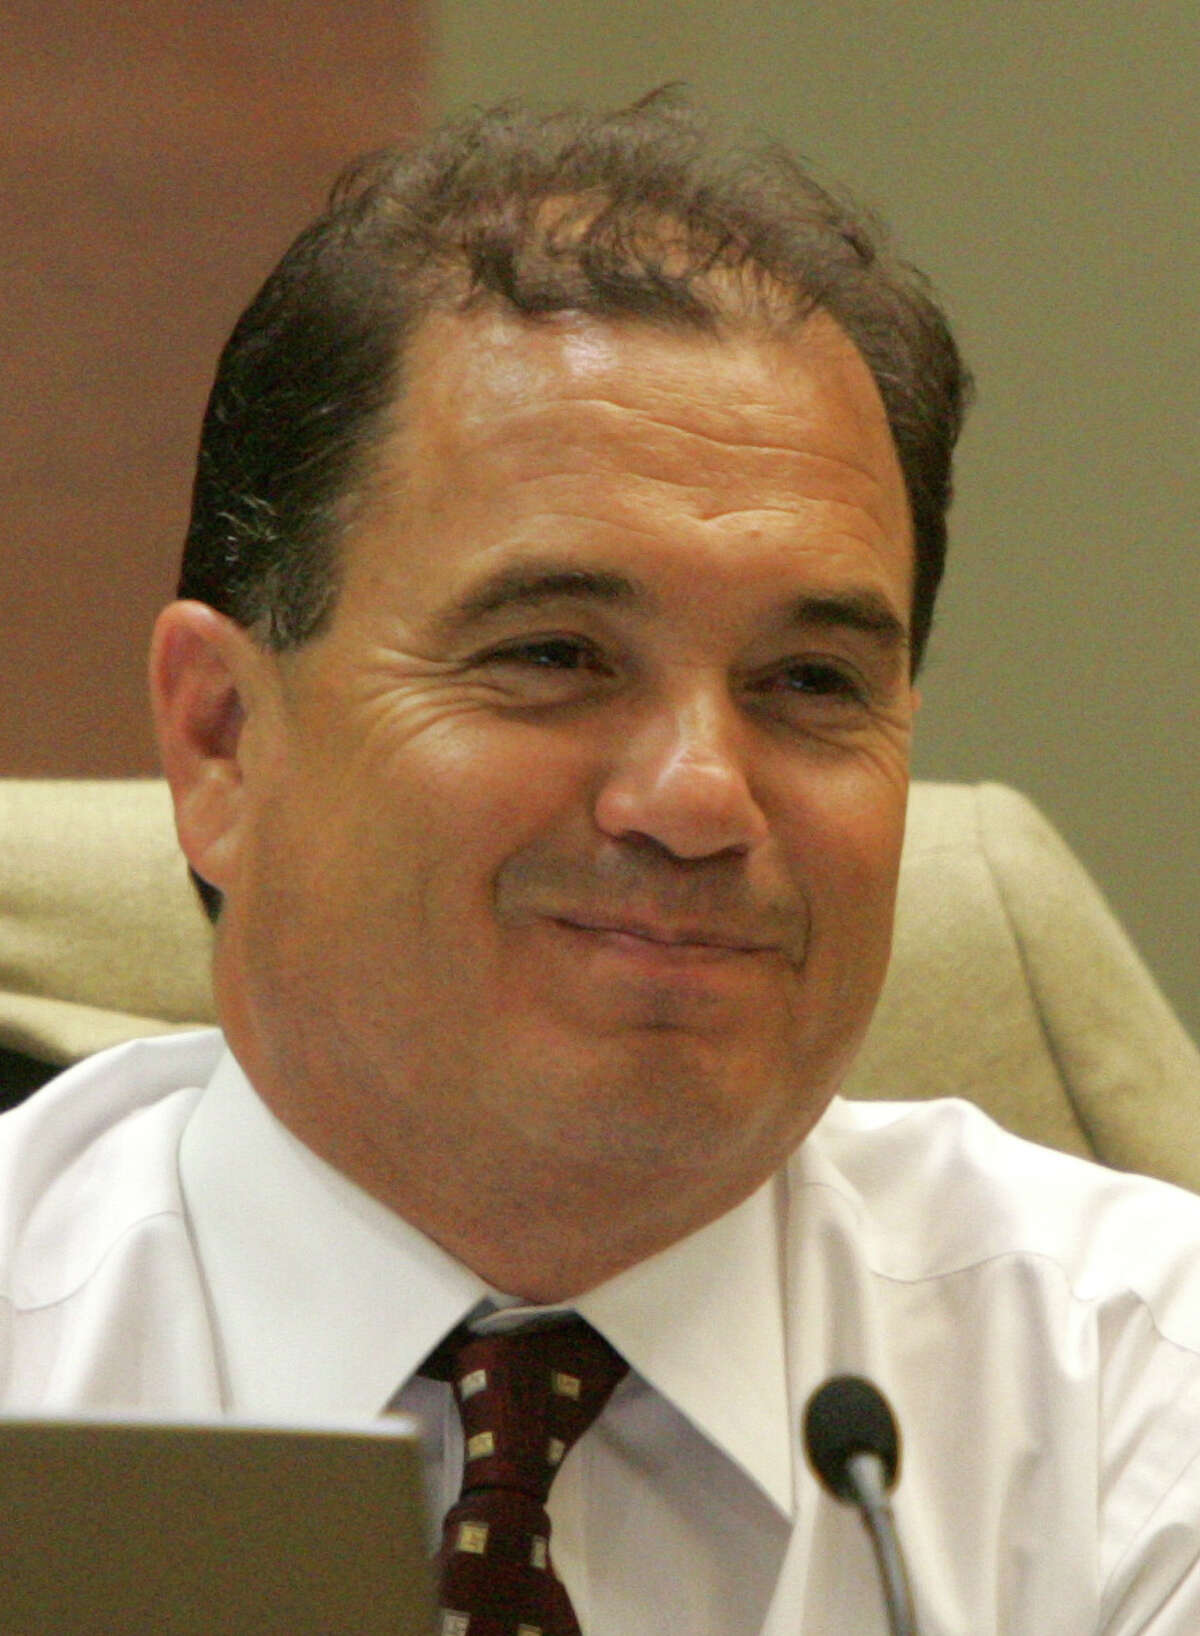 County Commissioner Sergio "Chico" Rodriguez, seen Tuesday afternoon July 12, 2005 at the county courthouse during commissioners' court.